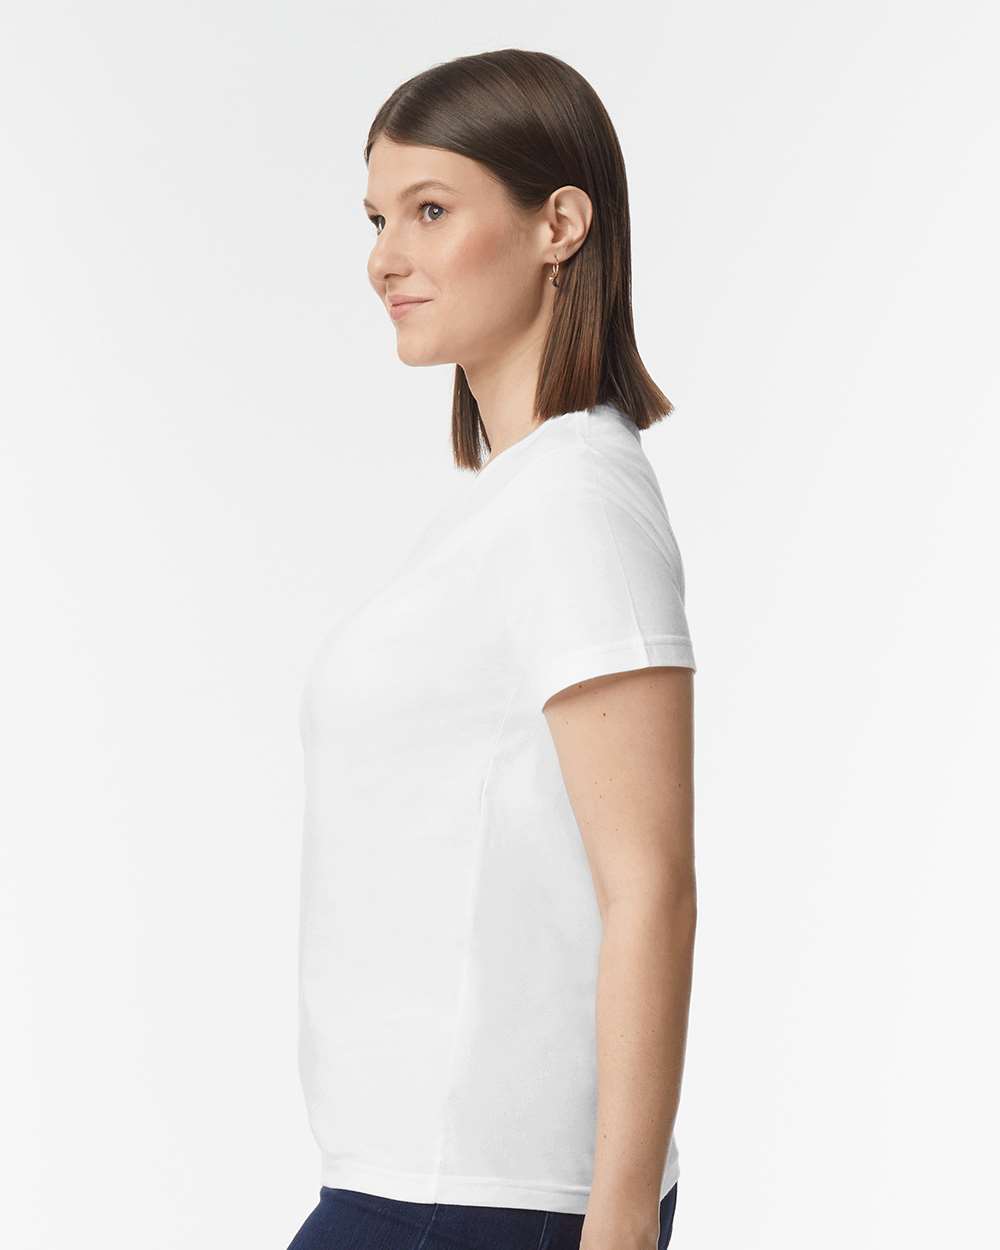 Gildan Softstyle® Women's Midweight T-Shirt 65000L #colormdl_White